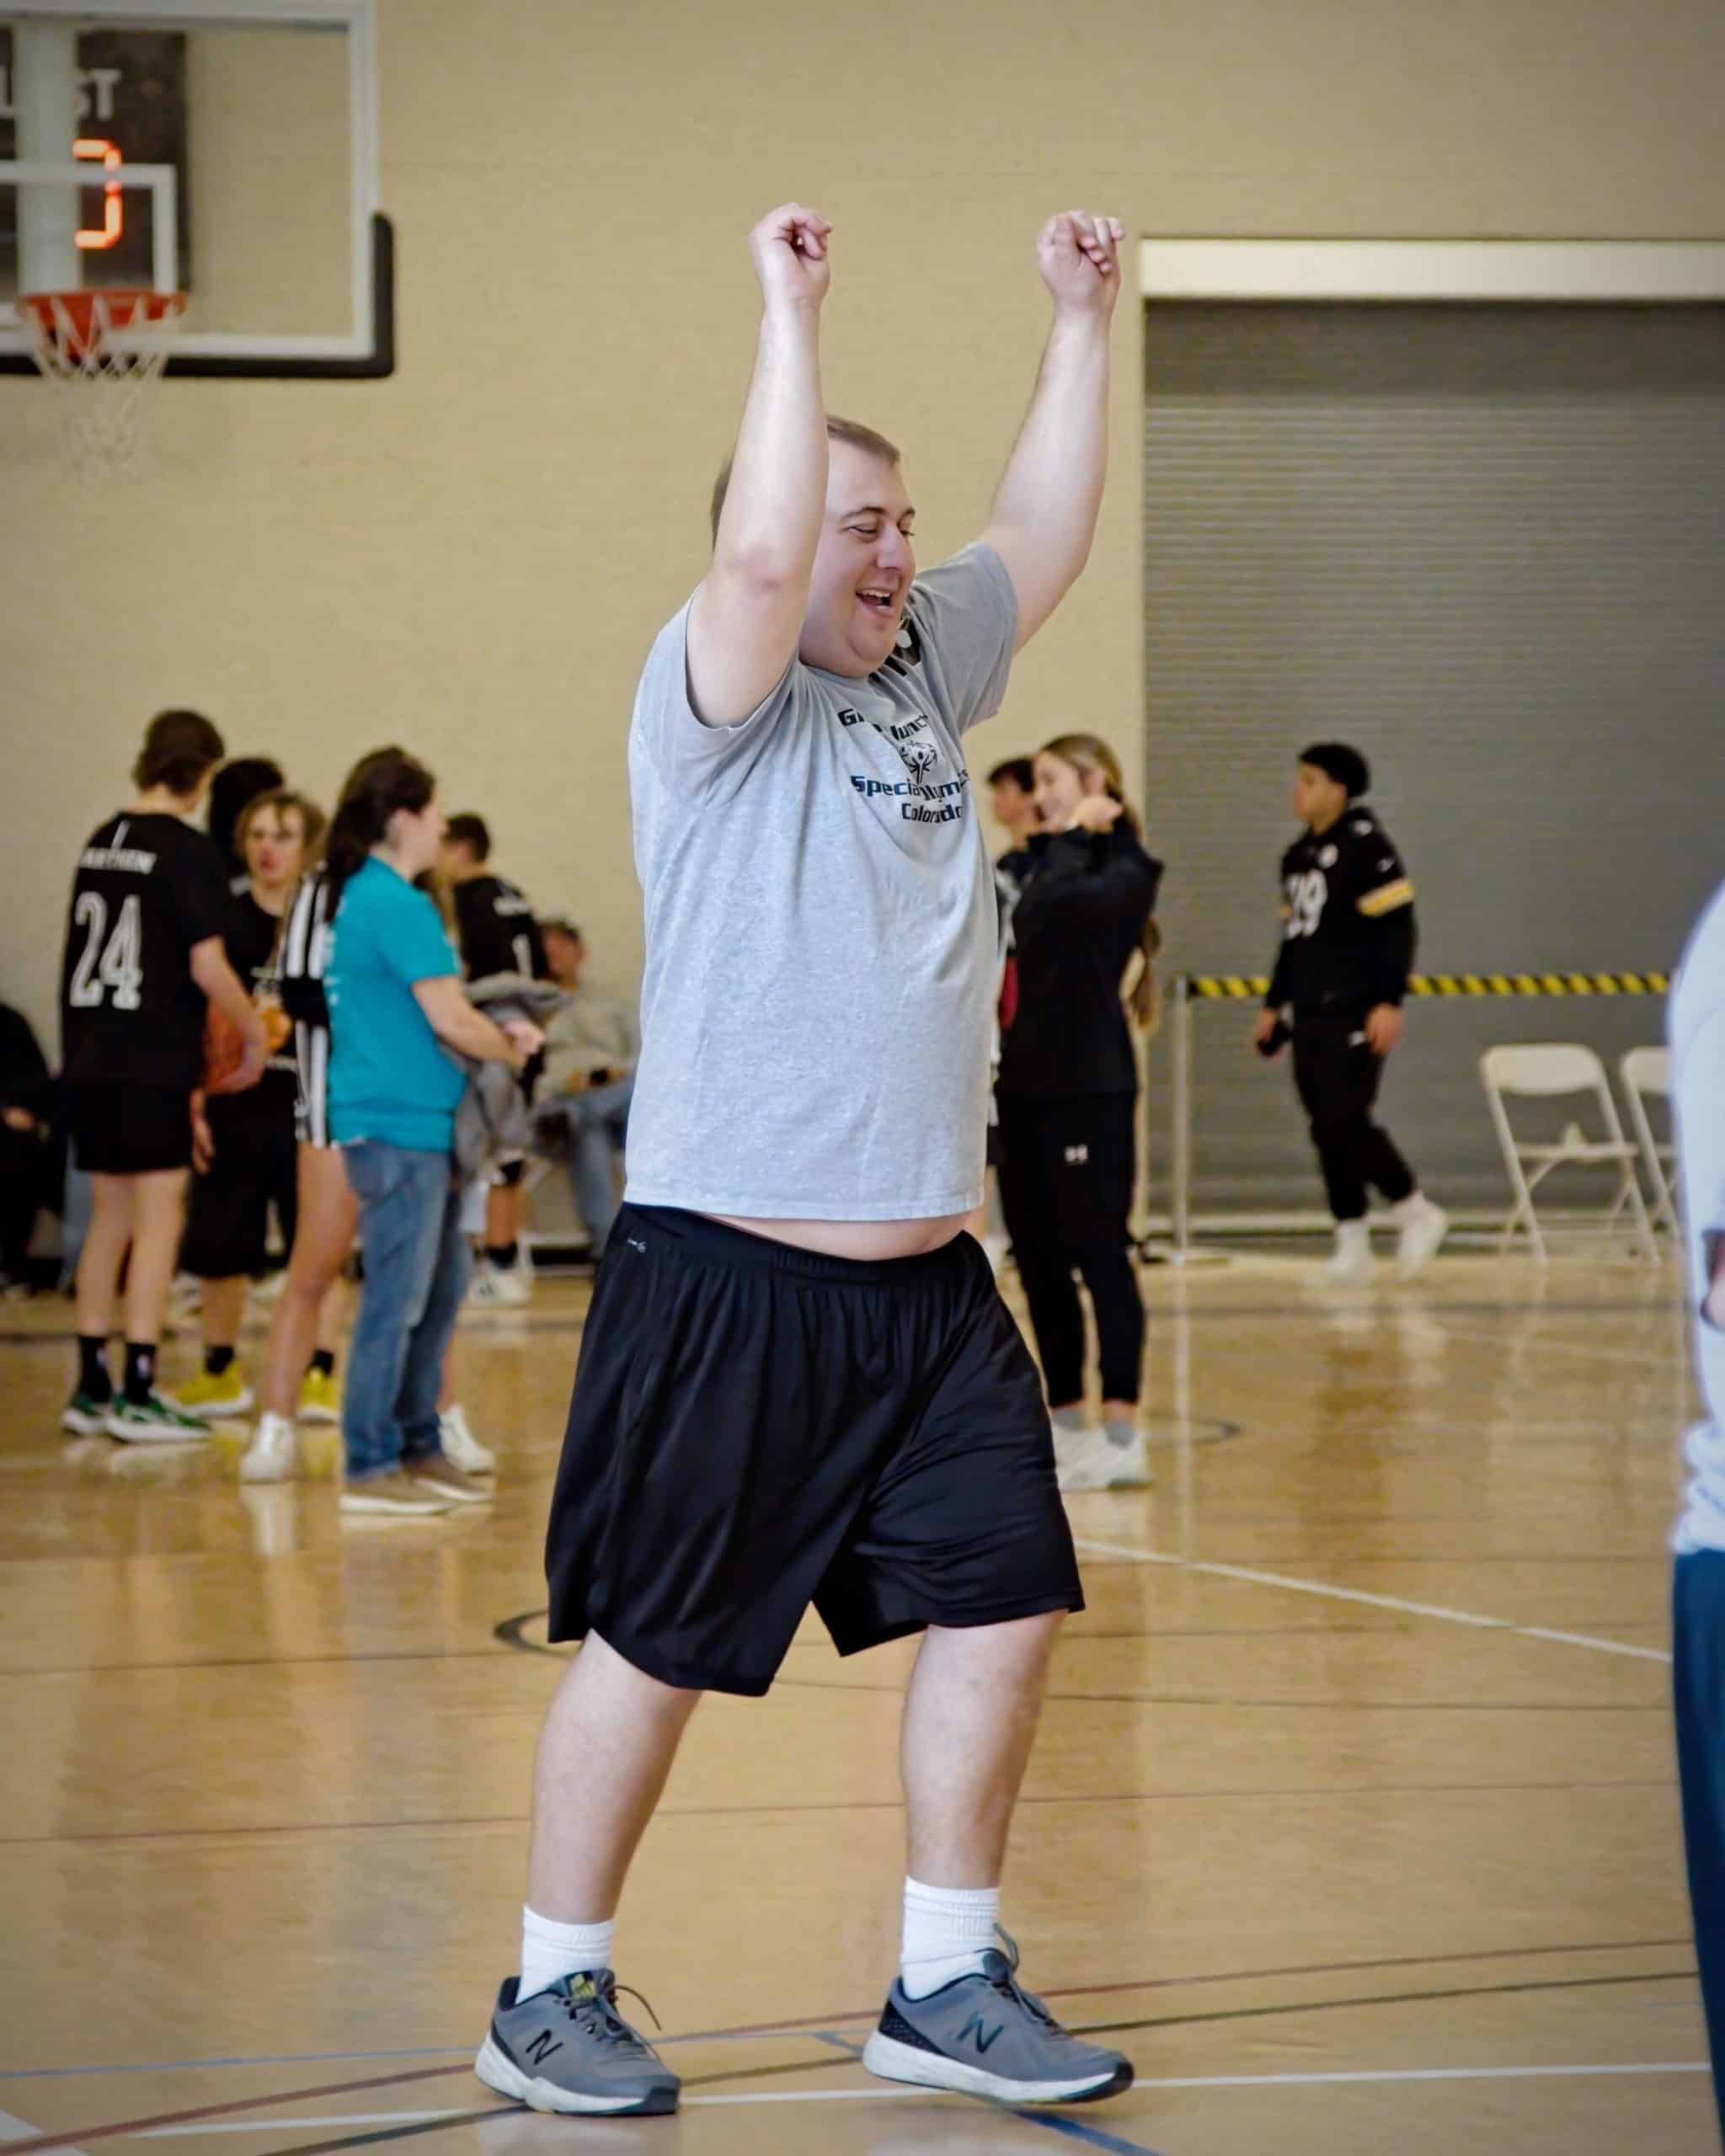 Q&A with Special Olympics Colorado Fitness Captain, Casey Collard